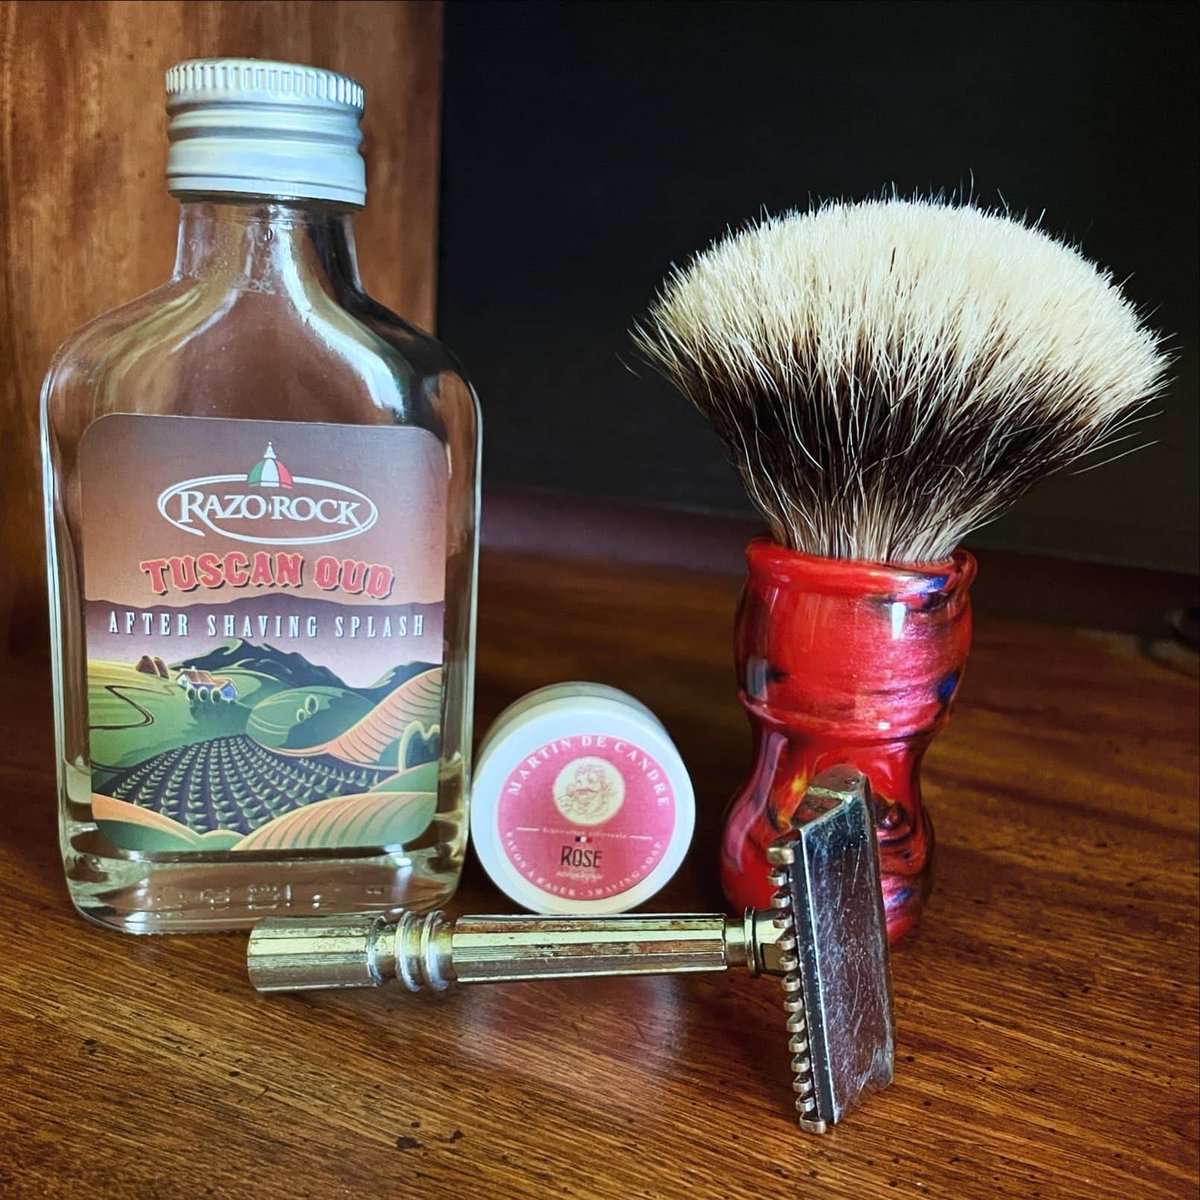 Today's shave gear: Gem MicroMatic Razor Martin de Candre Rose Soap Sample AP ShaveCo Luxury Brush RazoRock Tuscan Oud Aftershave ow.ly/XZ8C50RkKHX #shaveOfTheDay #shaveGear #mensGrooming #wetShaving #sotd